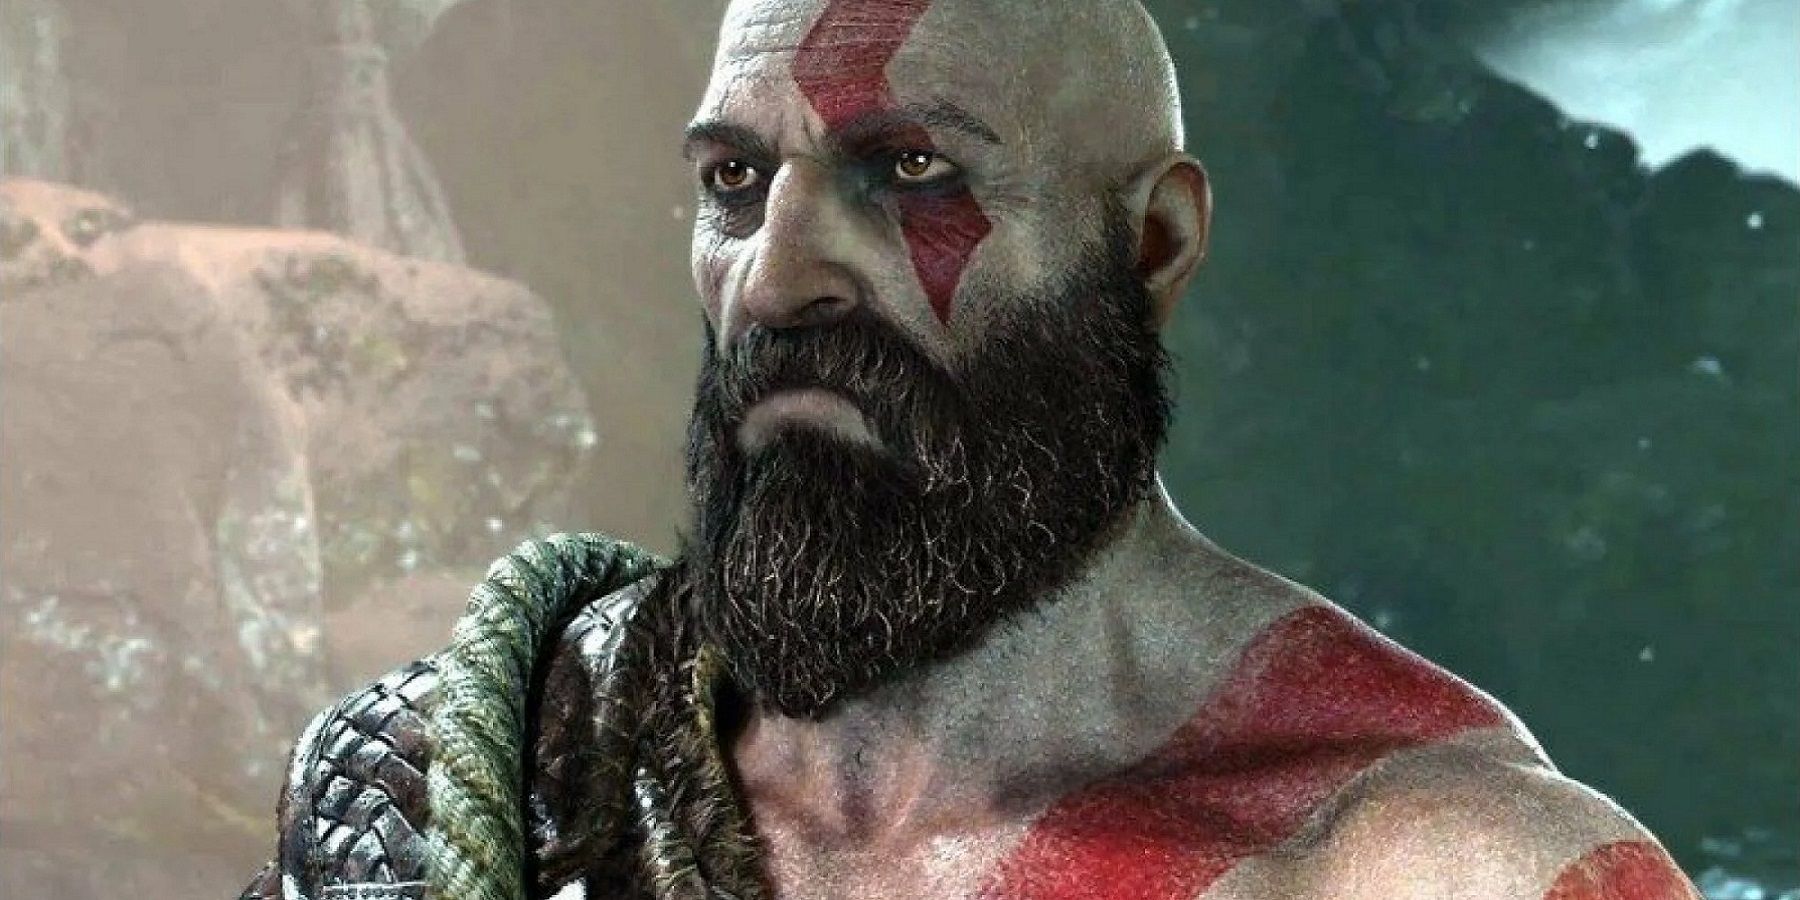 Image from God of War showing a close-up of Kratos with his bushy beard.